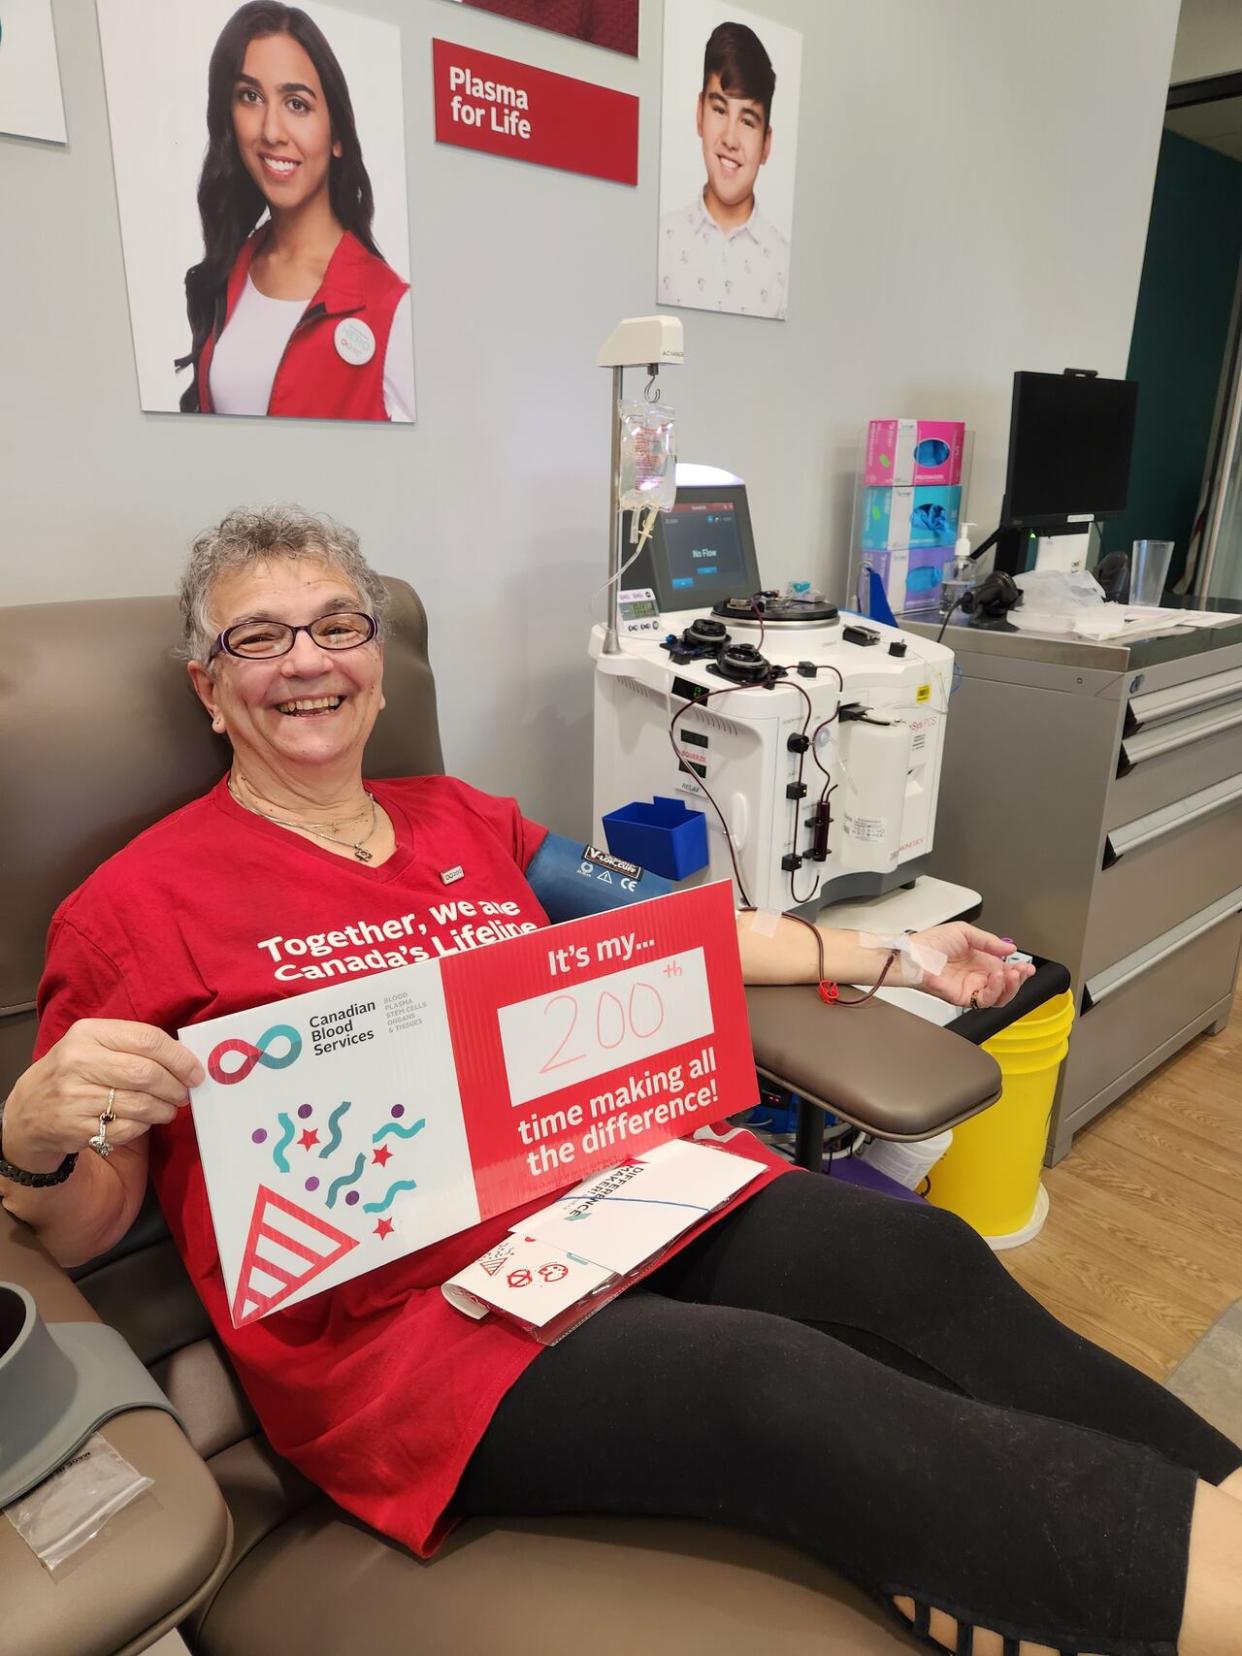 Hedy Halpern, a lifelong blood donor and former Canadian Blood Services volunteer, said she hopes that other members of the 2SLGBTQ+ community will feel OK about donating blood because 